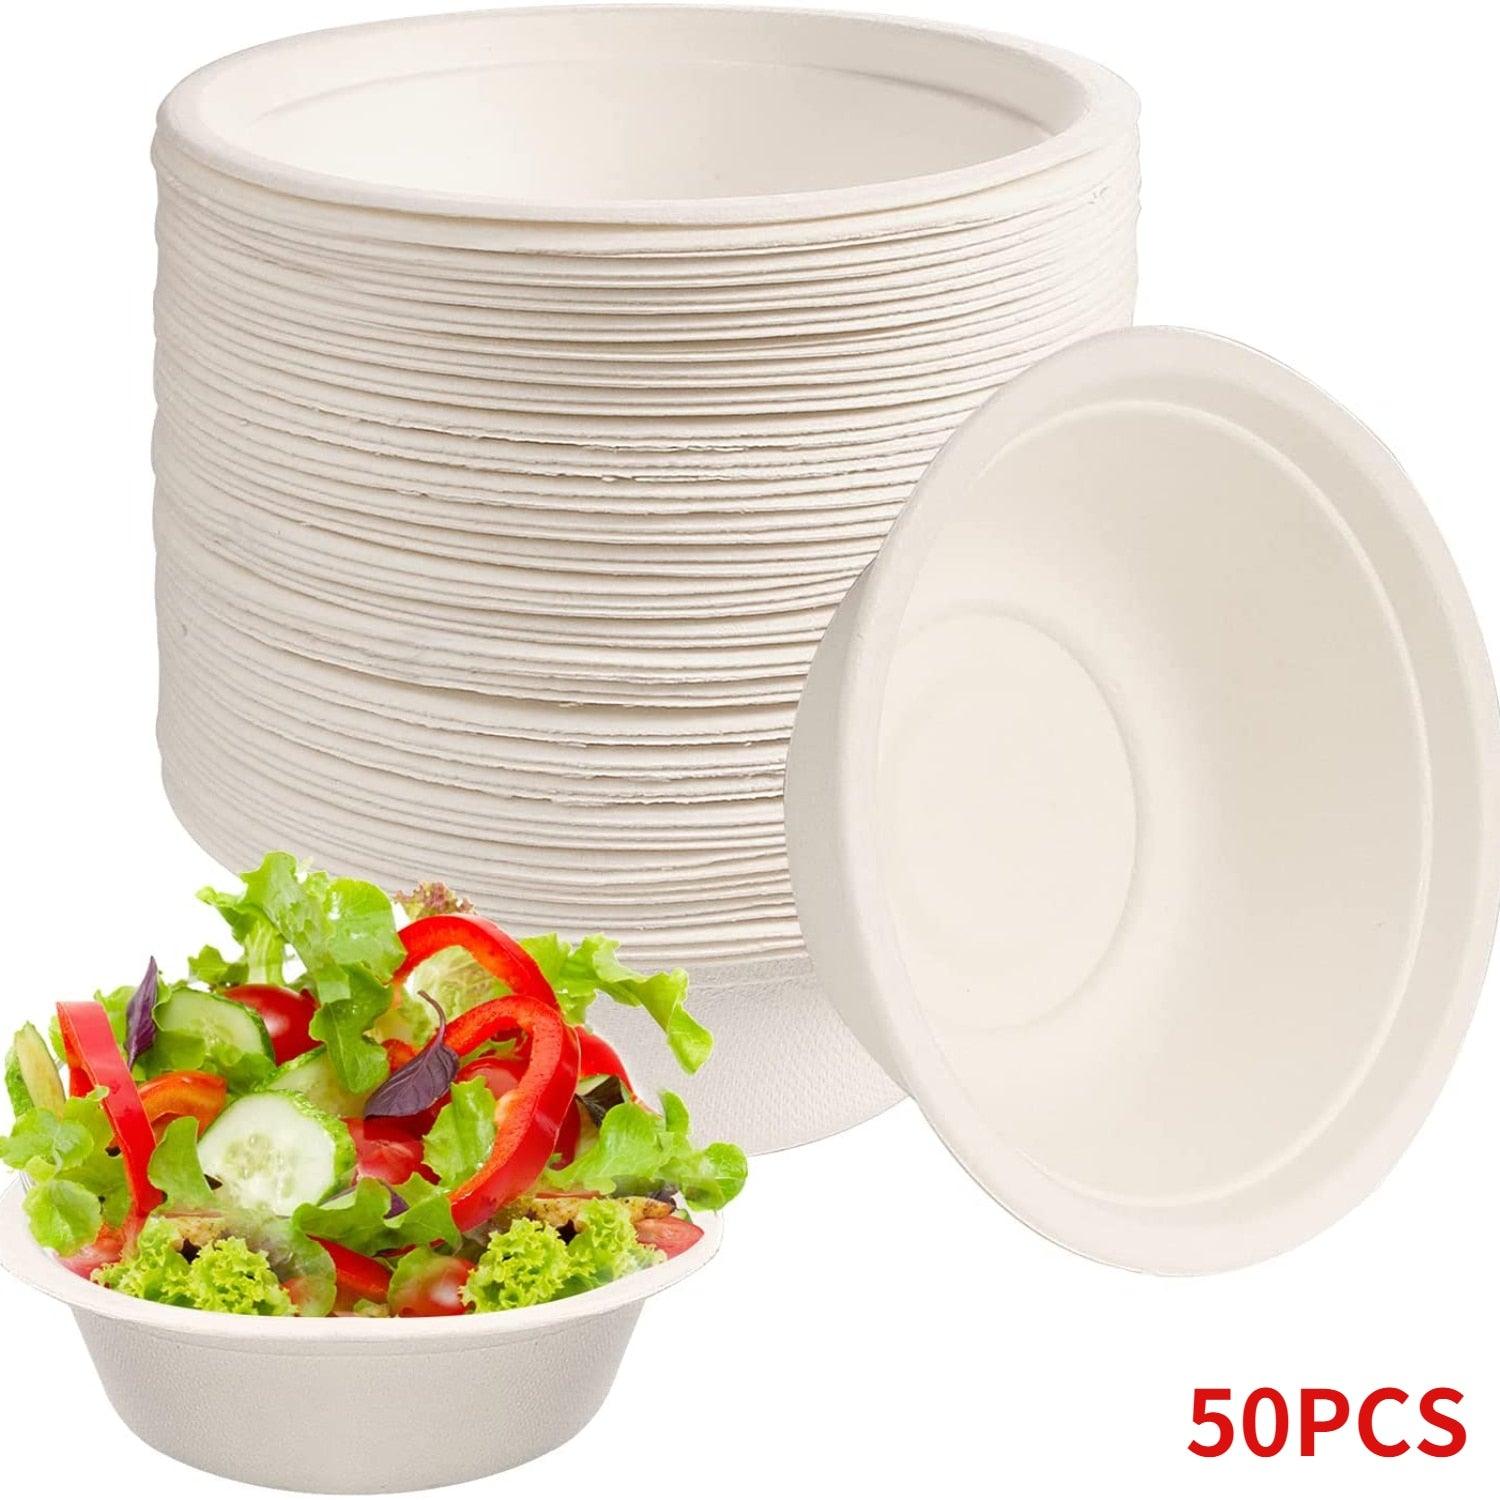 Disposable Paper Bowls - Strong Bagasse Bowls Made from Eco-Friendly, Biodegradable, and Compostable Sugar Cane for Parties and Events 50 Pcs